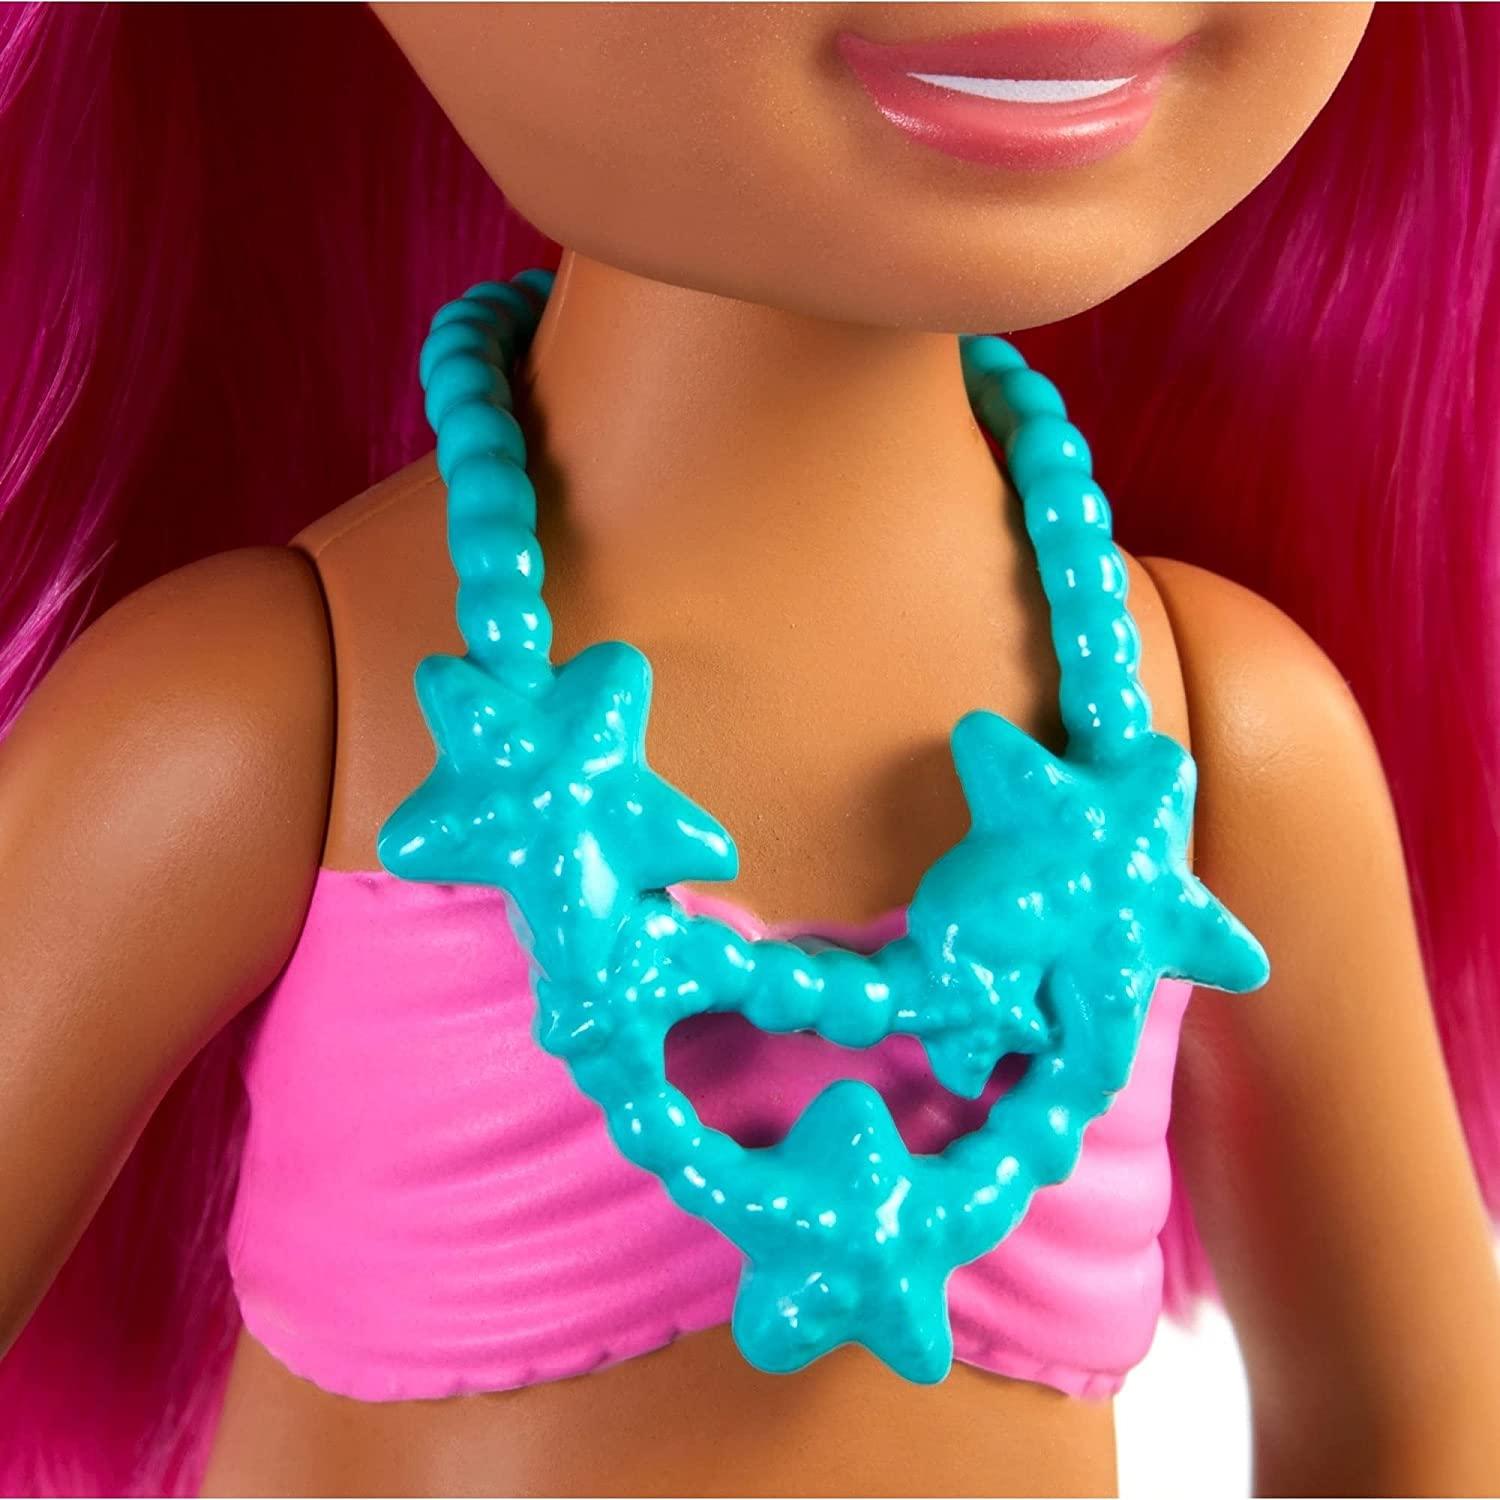 Barbie Dreamtopia Chelsea Mermaid Doll, 6.5-inch with Pink Hair and Tail, Multicolor - BumbleToys - 5-7 Years, Barbie, Fashion Dolls & Accessories, Girls, Mermaid, Pre-Order